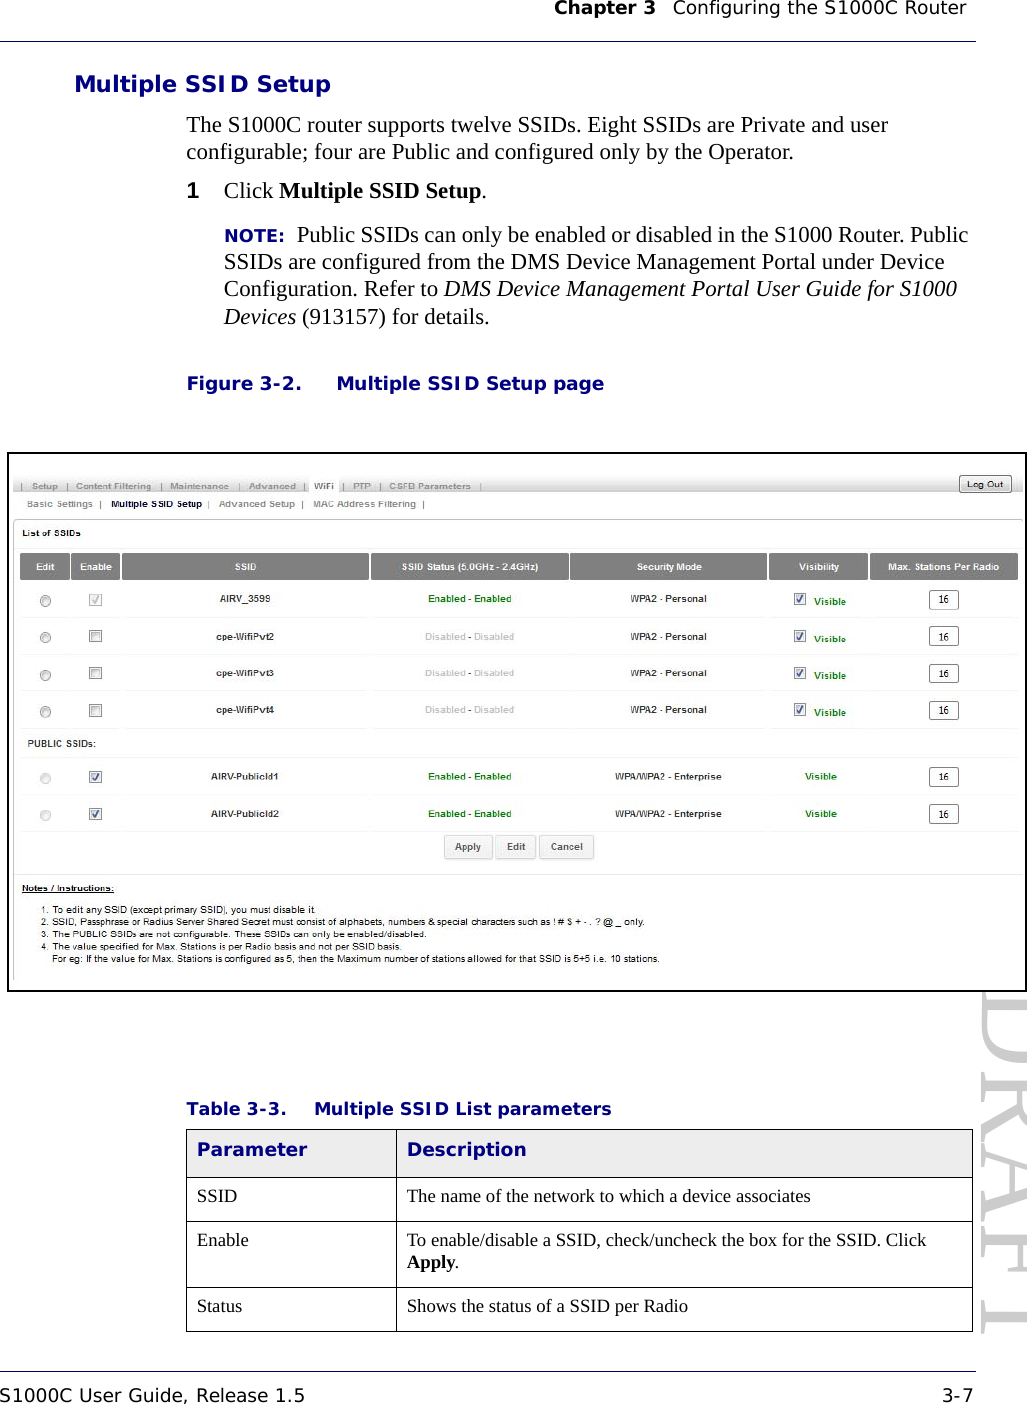 Chapter 3    Configuring the S1000C Router S1000C User Guide, Release 1.5 3-7DRAFTMultiple SSID SetupThe S1000C router supports twelve SSIDs. Eight SSIDs are Private and user configurable; four are Public and configured only by the Operator.1Click Multiple SSID Setup.NOTE:  Public SSIDs can only be enabled or disabled in the S1000 Router. Public SSIDs are configured from the DMS Device Management Portal under Device Configuration. Refer to DMS Device Management Portal User Guide for S1000 Devices (913157) for details.Figure 3-2. Multiple SSID Setup pageTable 3-3. Multiple SSID List parametersParameter DescriptionSSID  The name of the network to which a device associatesEnable  To enable/disable a SSID, check/uncheck the box for the SSID. Click Apply.Status Shows the status of a SSID per Radio